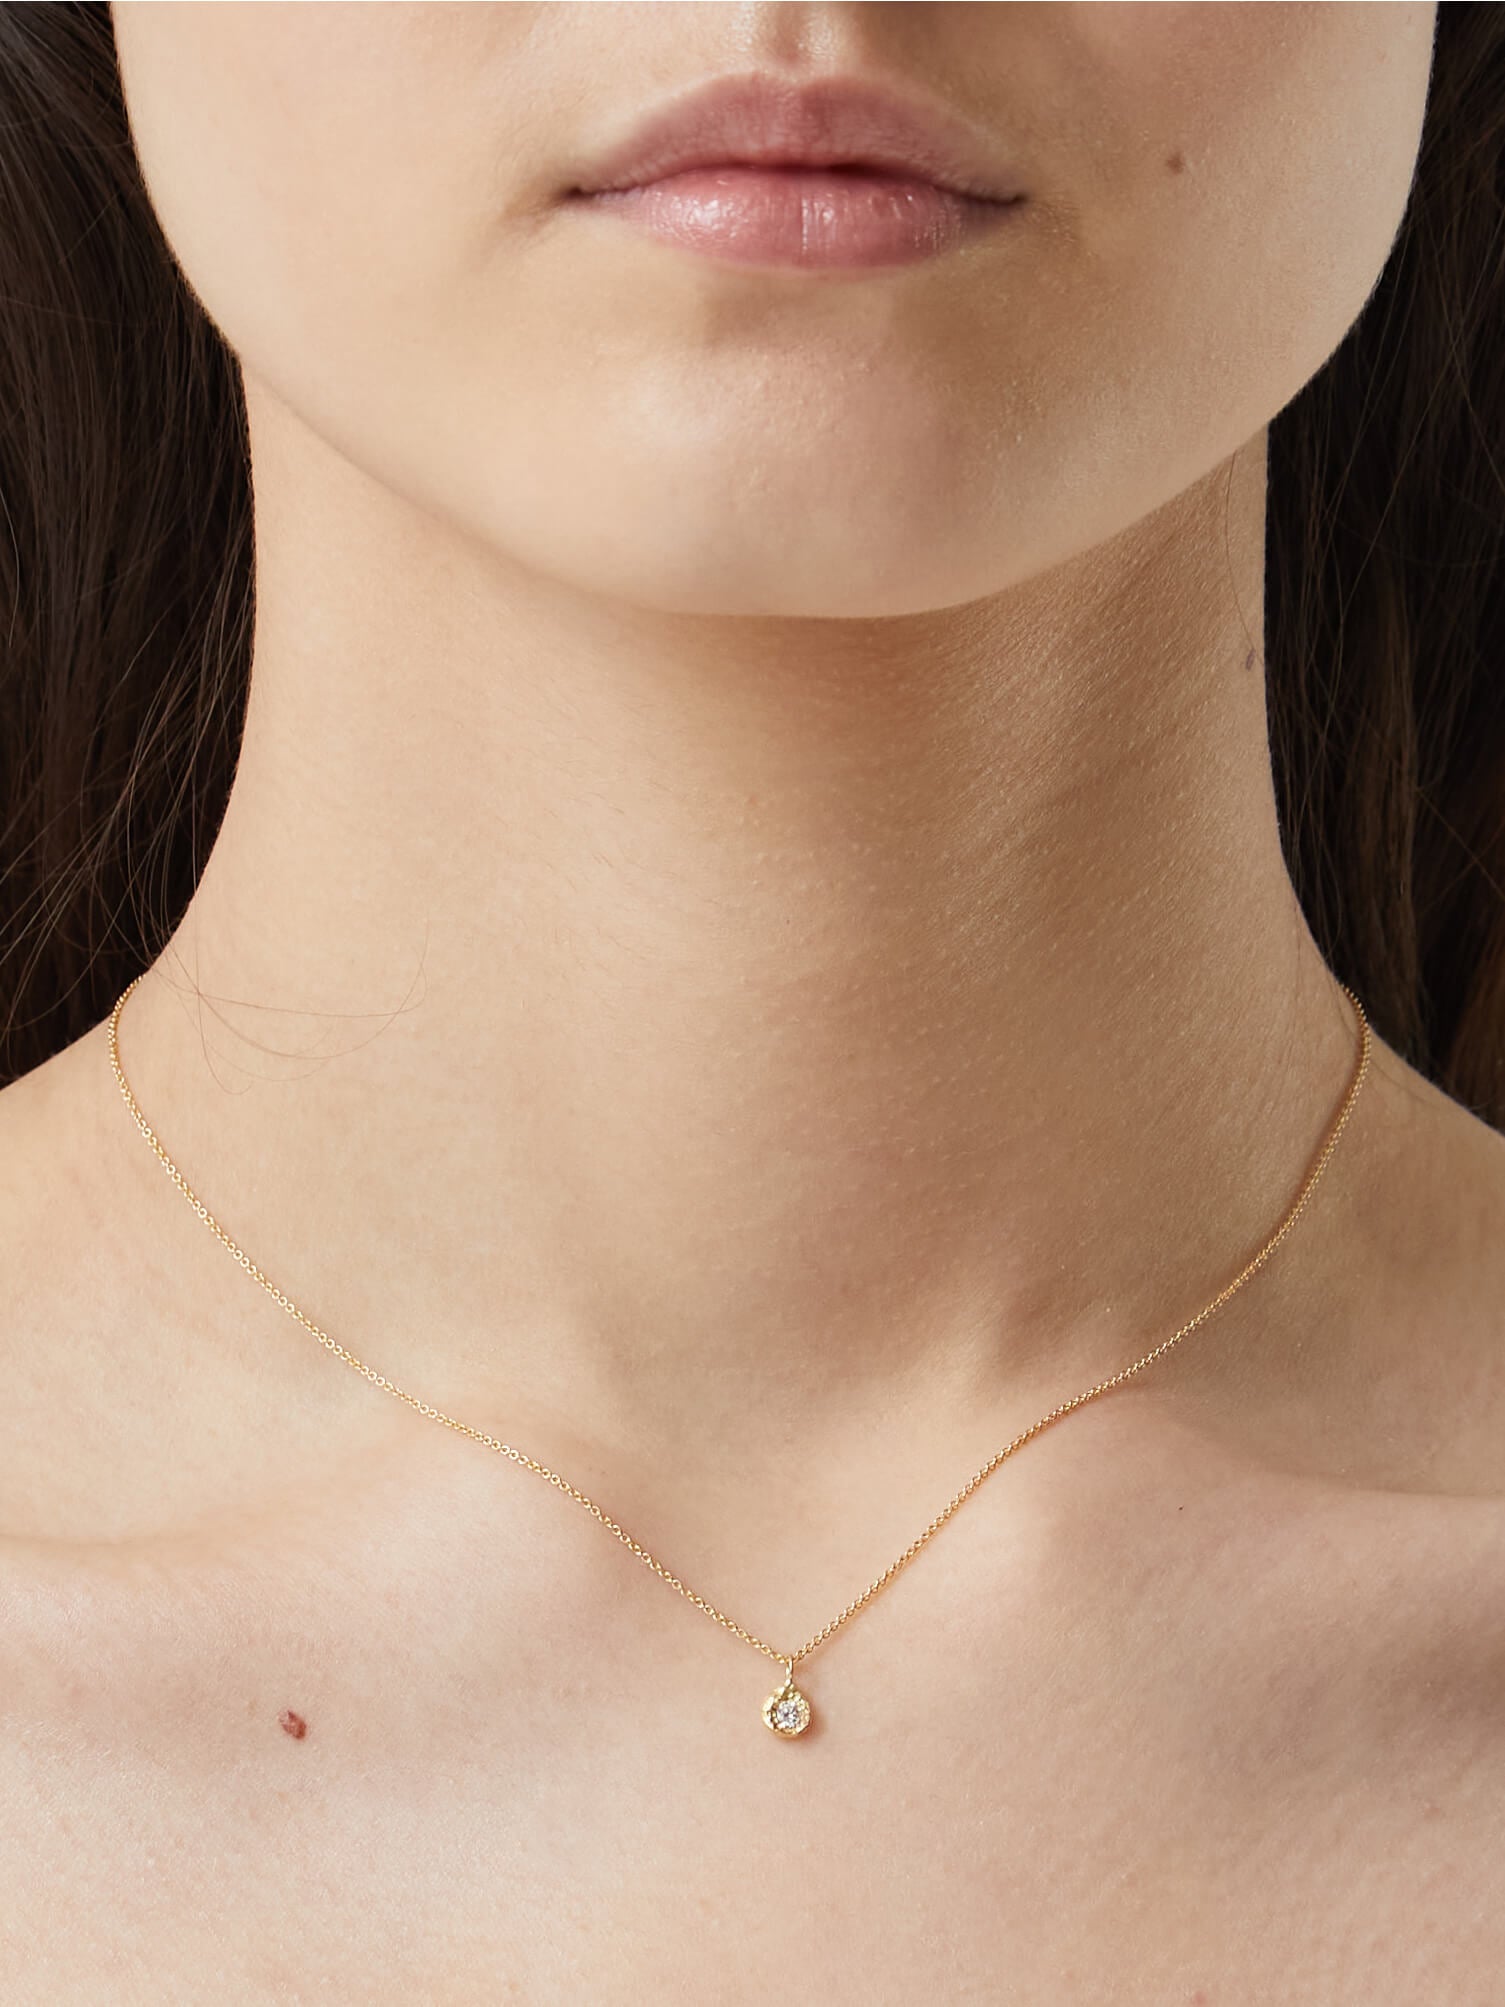 Iman 0.10ct Necklace in 18k Yellow Gold